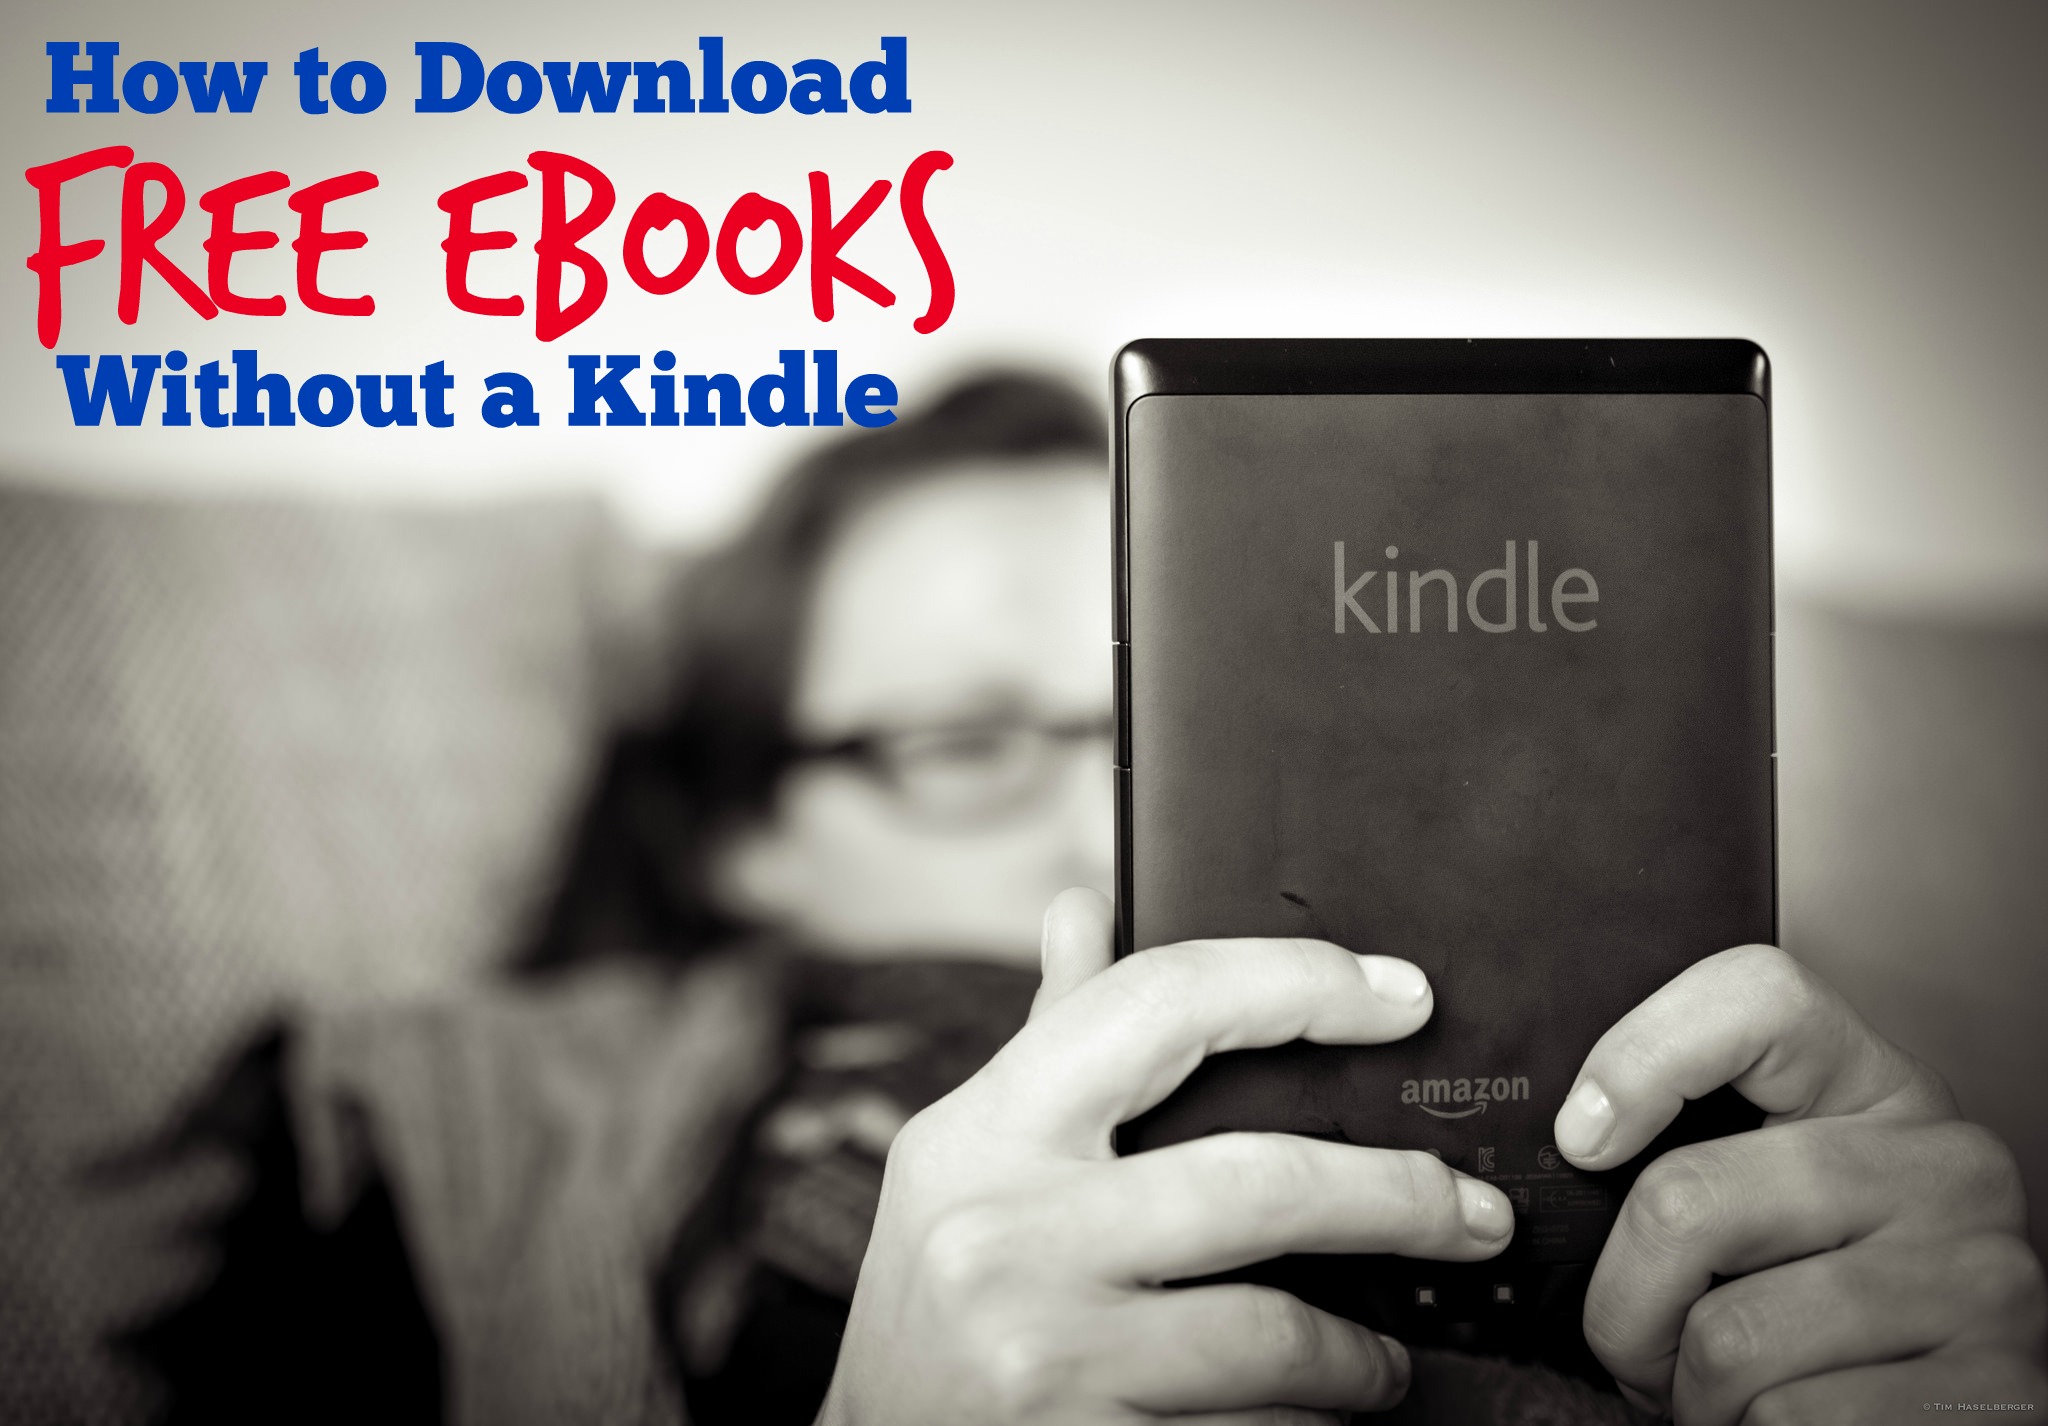 How to Download Free Ebooks Without a Kindle